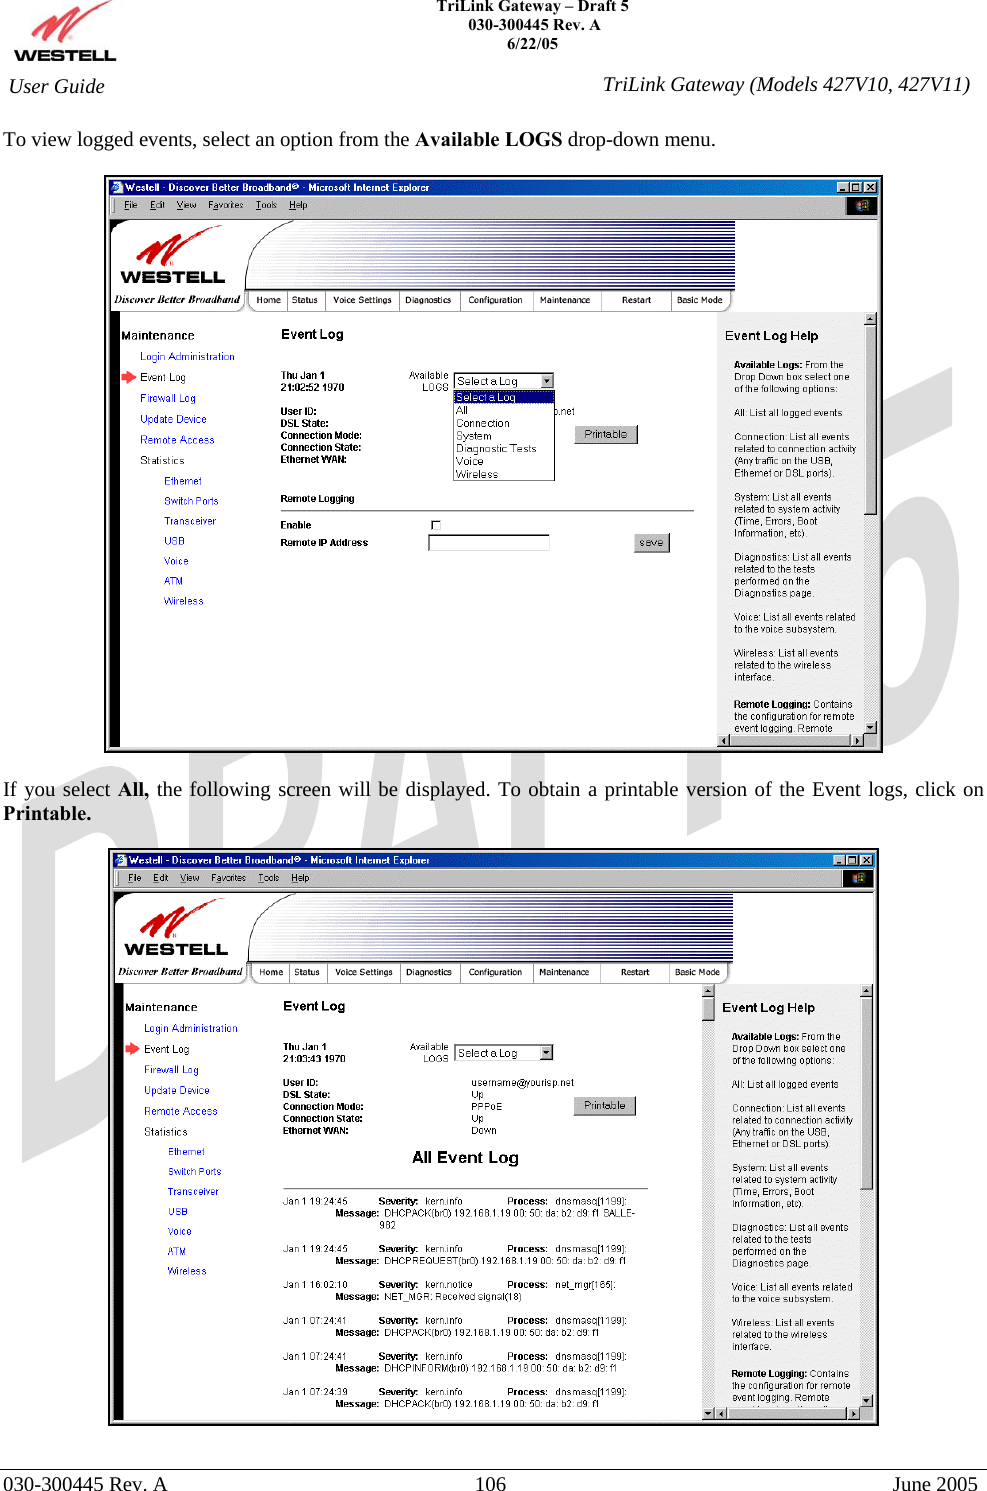    TriLink Gateway – Draft 5   030-300445 Rev. A 6/22/05   030-300445 Rev. A  106  June 2005  User Guide  TriLink Gateway (Models 427V10, 427V11)To view logged events, select an option from the Available LOGS drop-down menu.    If you select All, the following screen will be displayed. To obtain a printable version of the Event logs, click on Printable.    